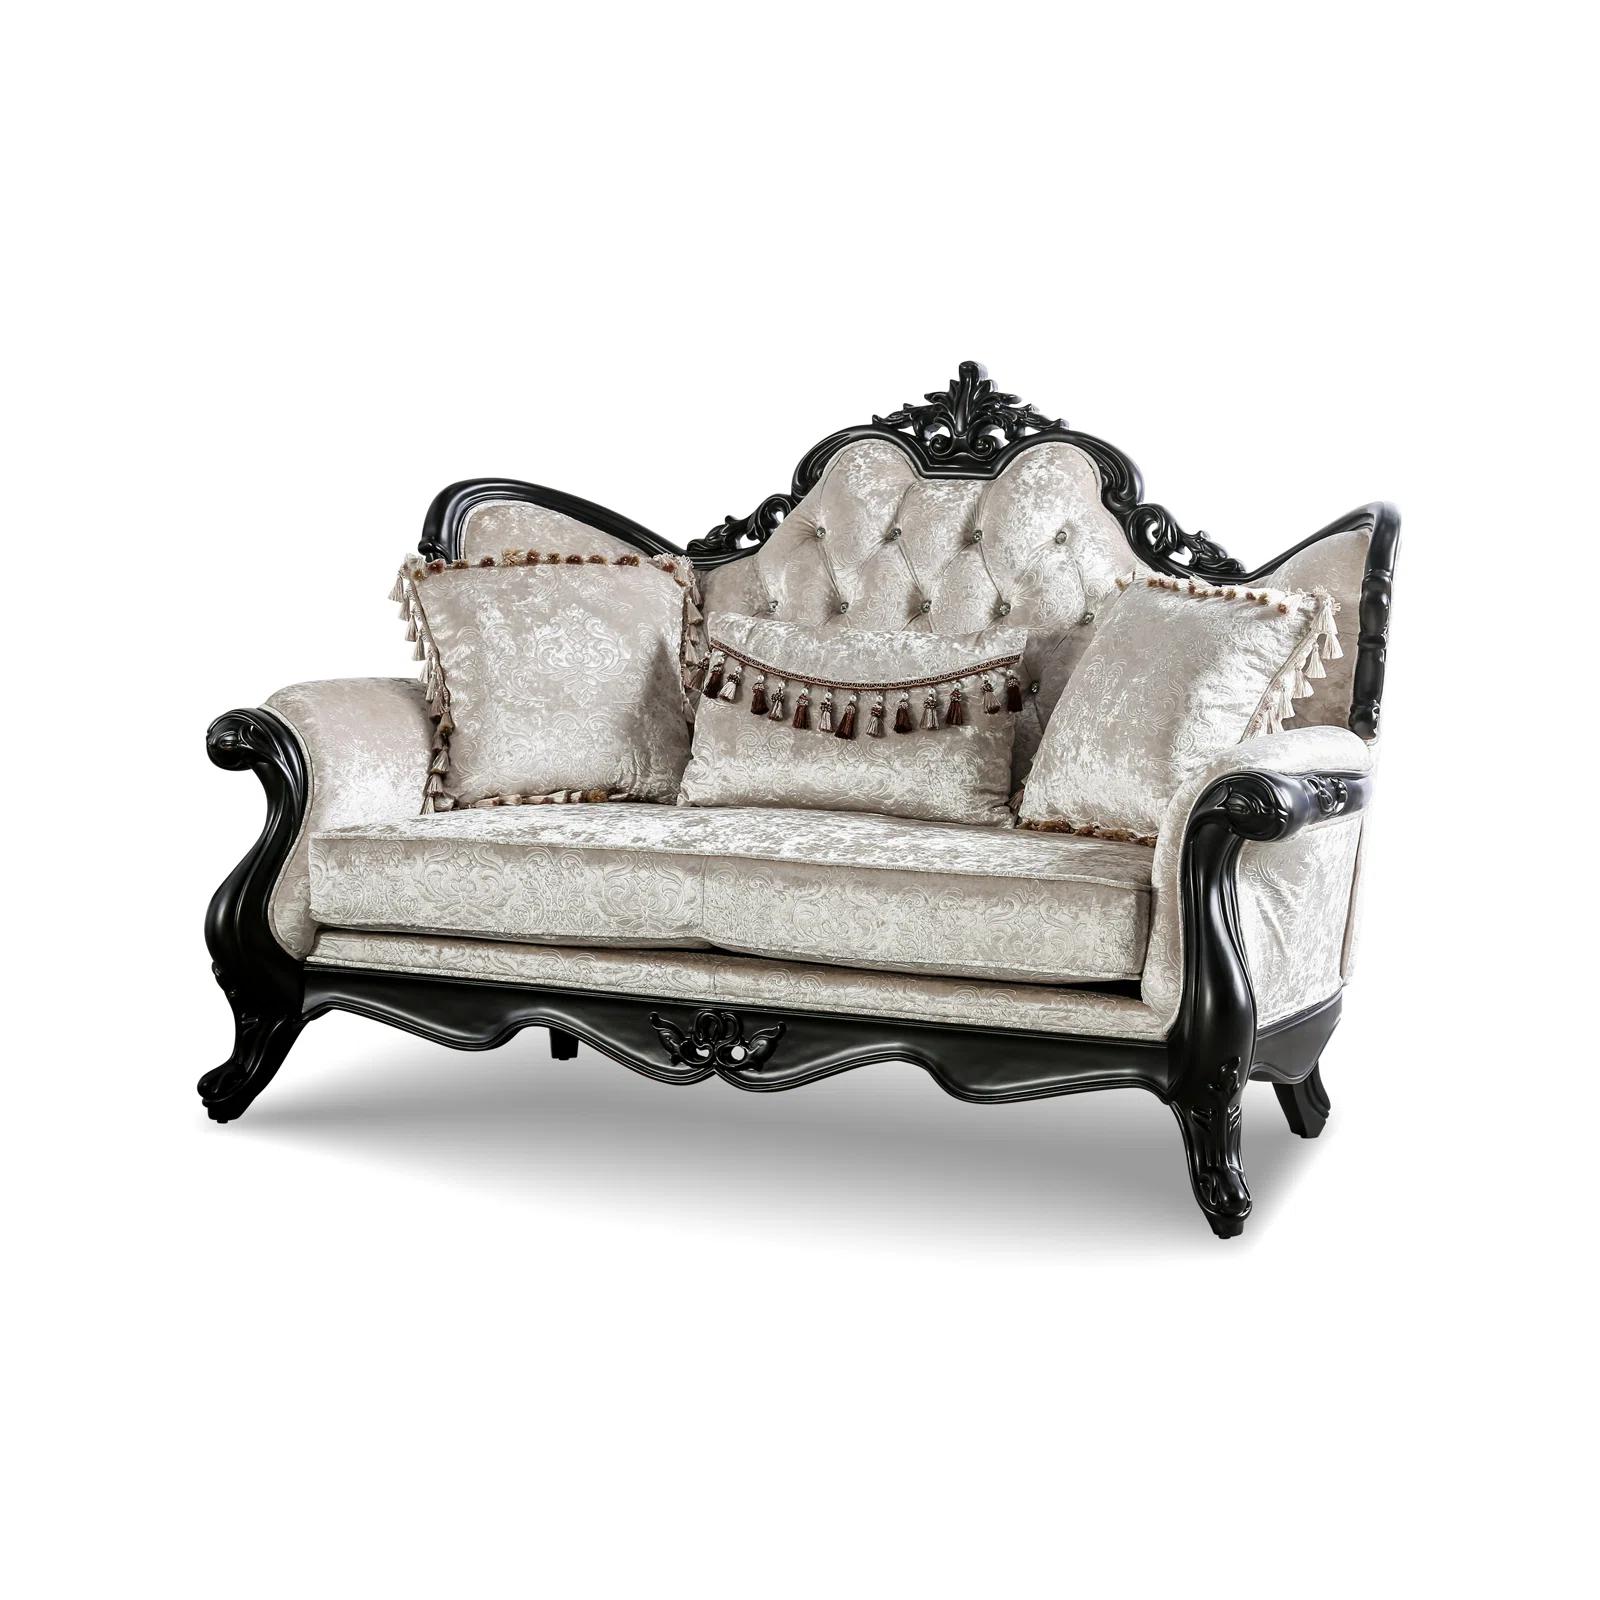 Traditional, Transitional Loveseat FM65001ES-LV FM65001ES-LV in Off-White Leather Match